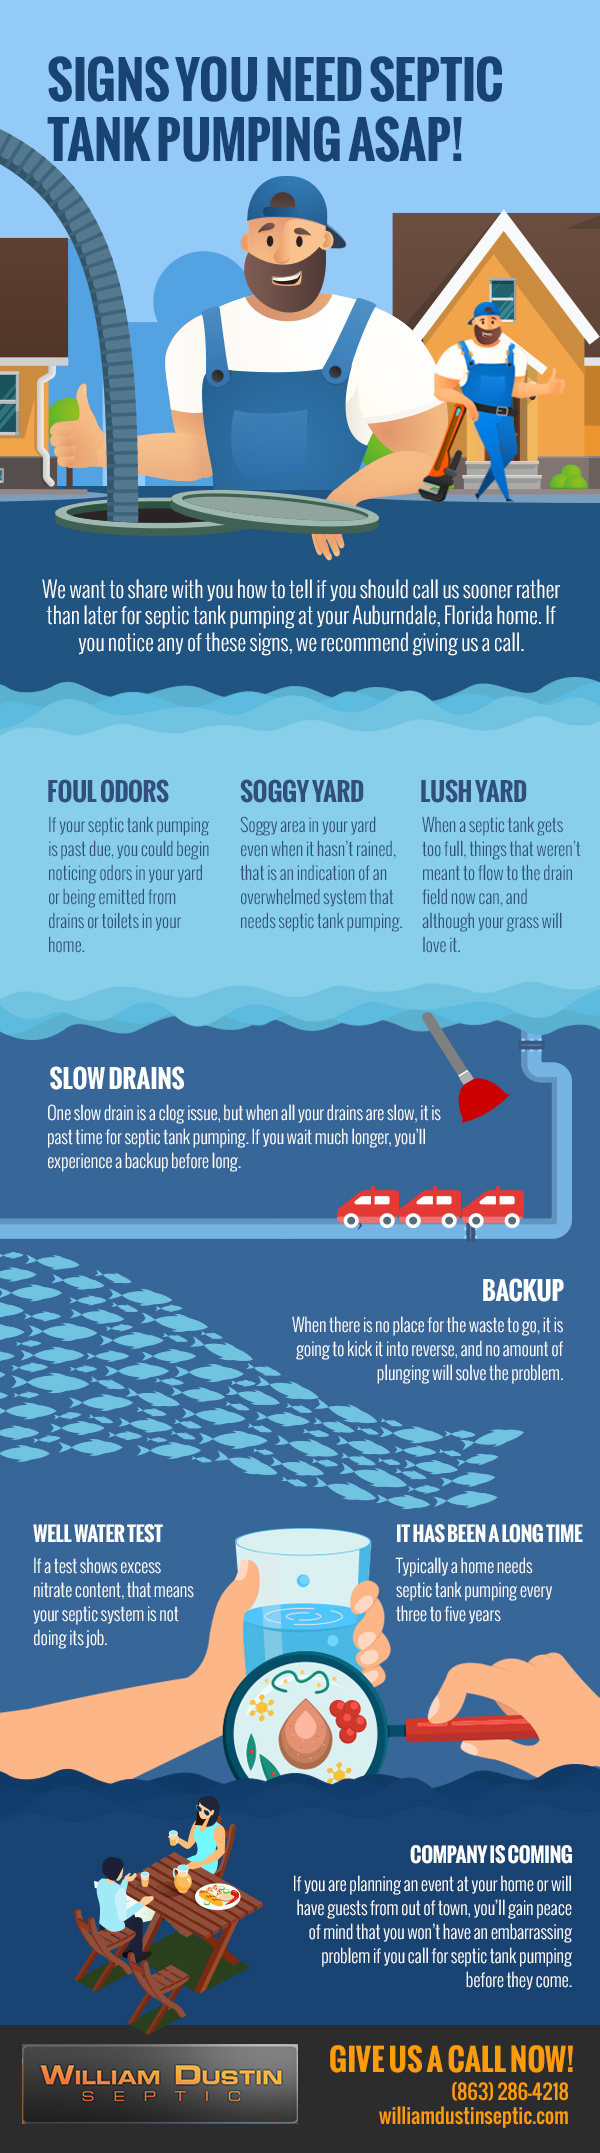 Signs You Need Septic Tank Pumping ASAP! [infographic]